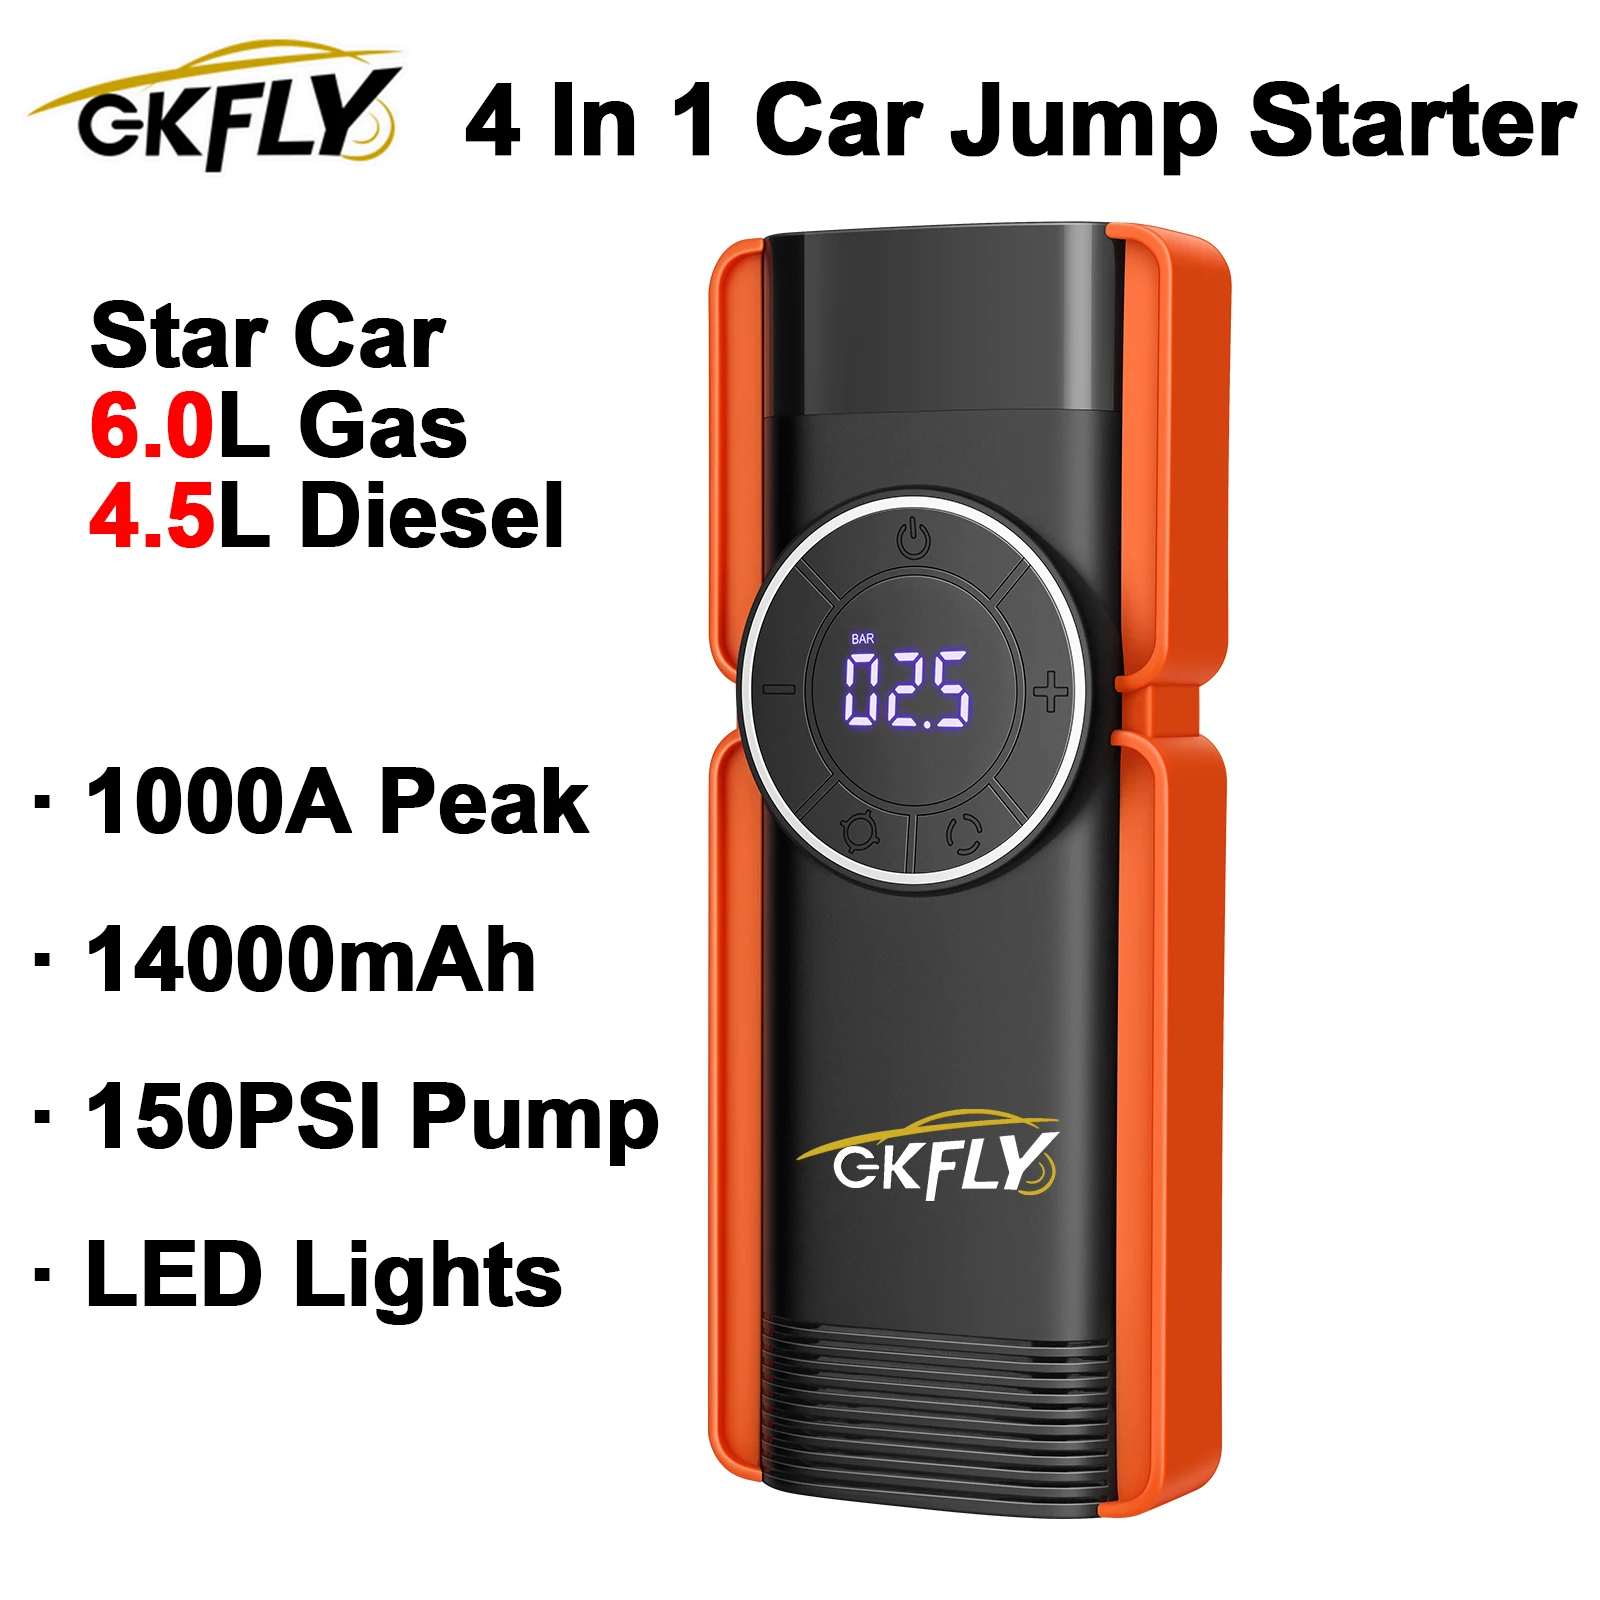 GKFLY 1000A Jump Starter 4 in 1 Air Compressor Power Bank Portable Battery Auto Buster For Car Emergency Booster Starting Device